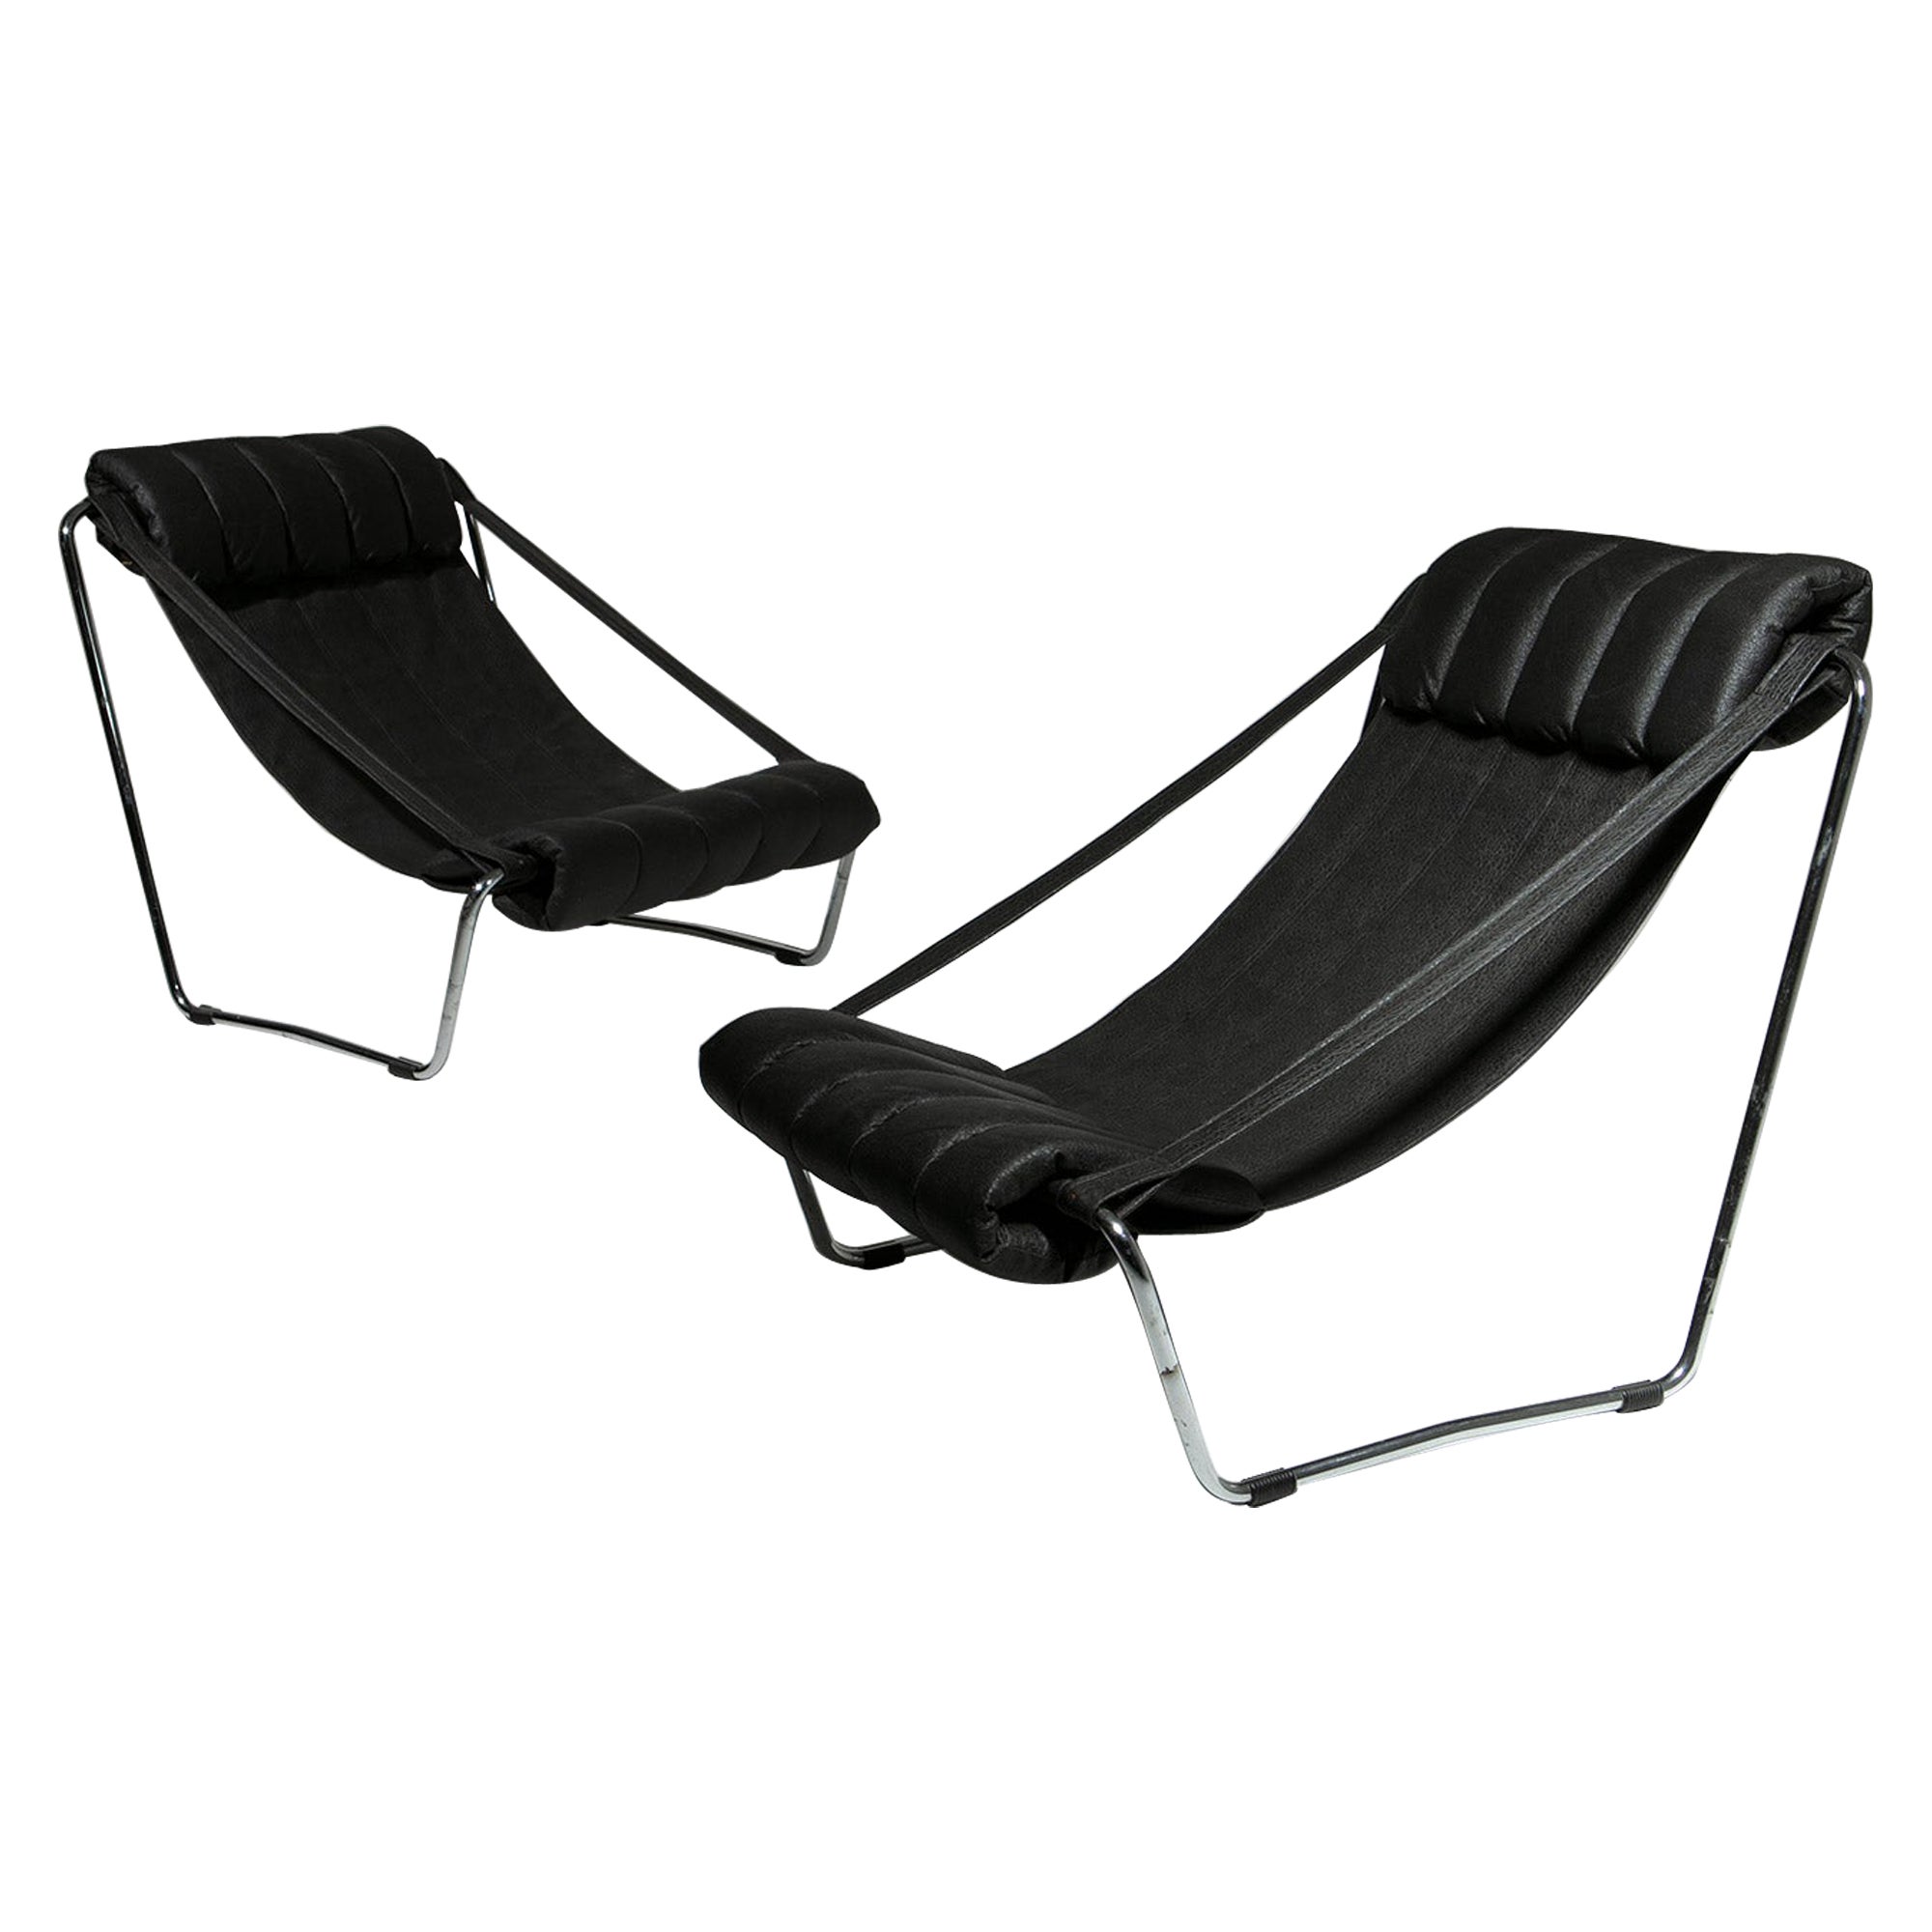 Pair Chrome Lounge Chairs by Corsini - Wiskemann for Cinova, Italy, 1970s For Sale